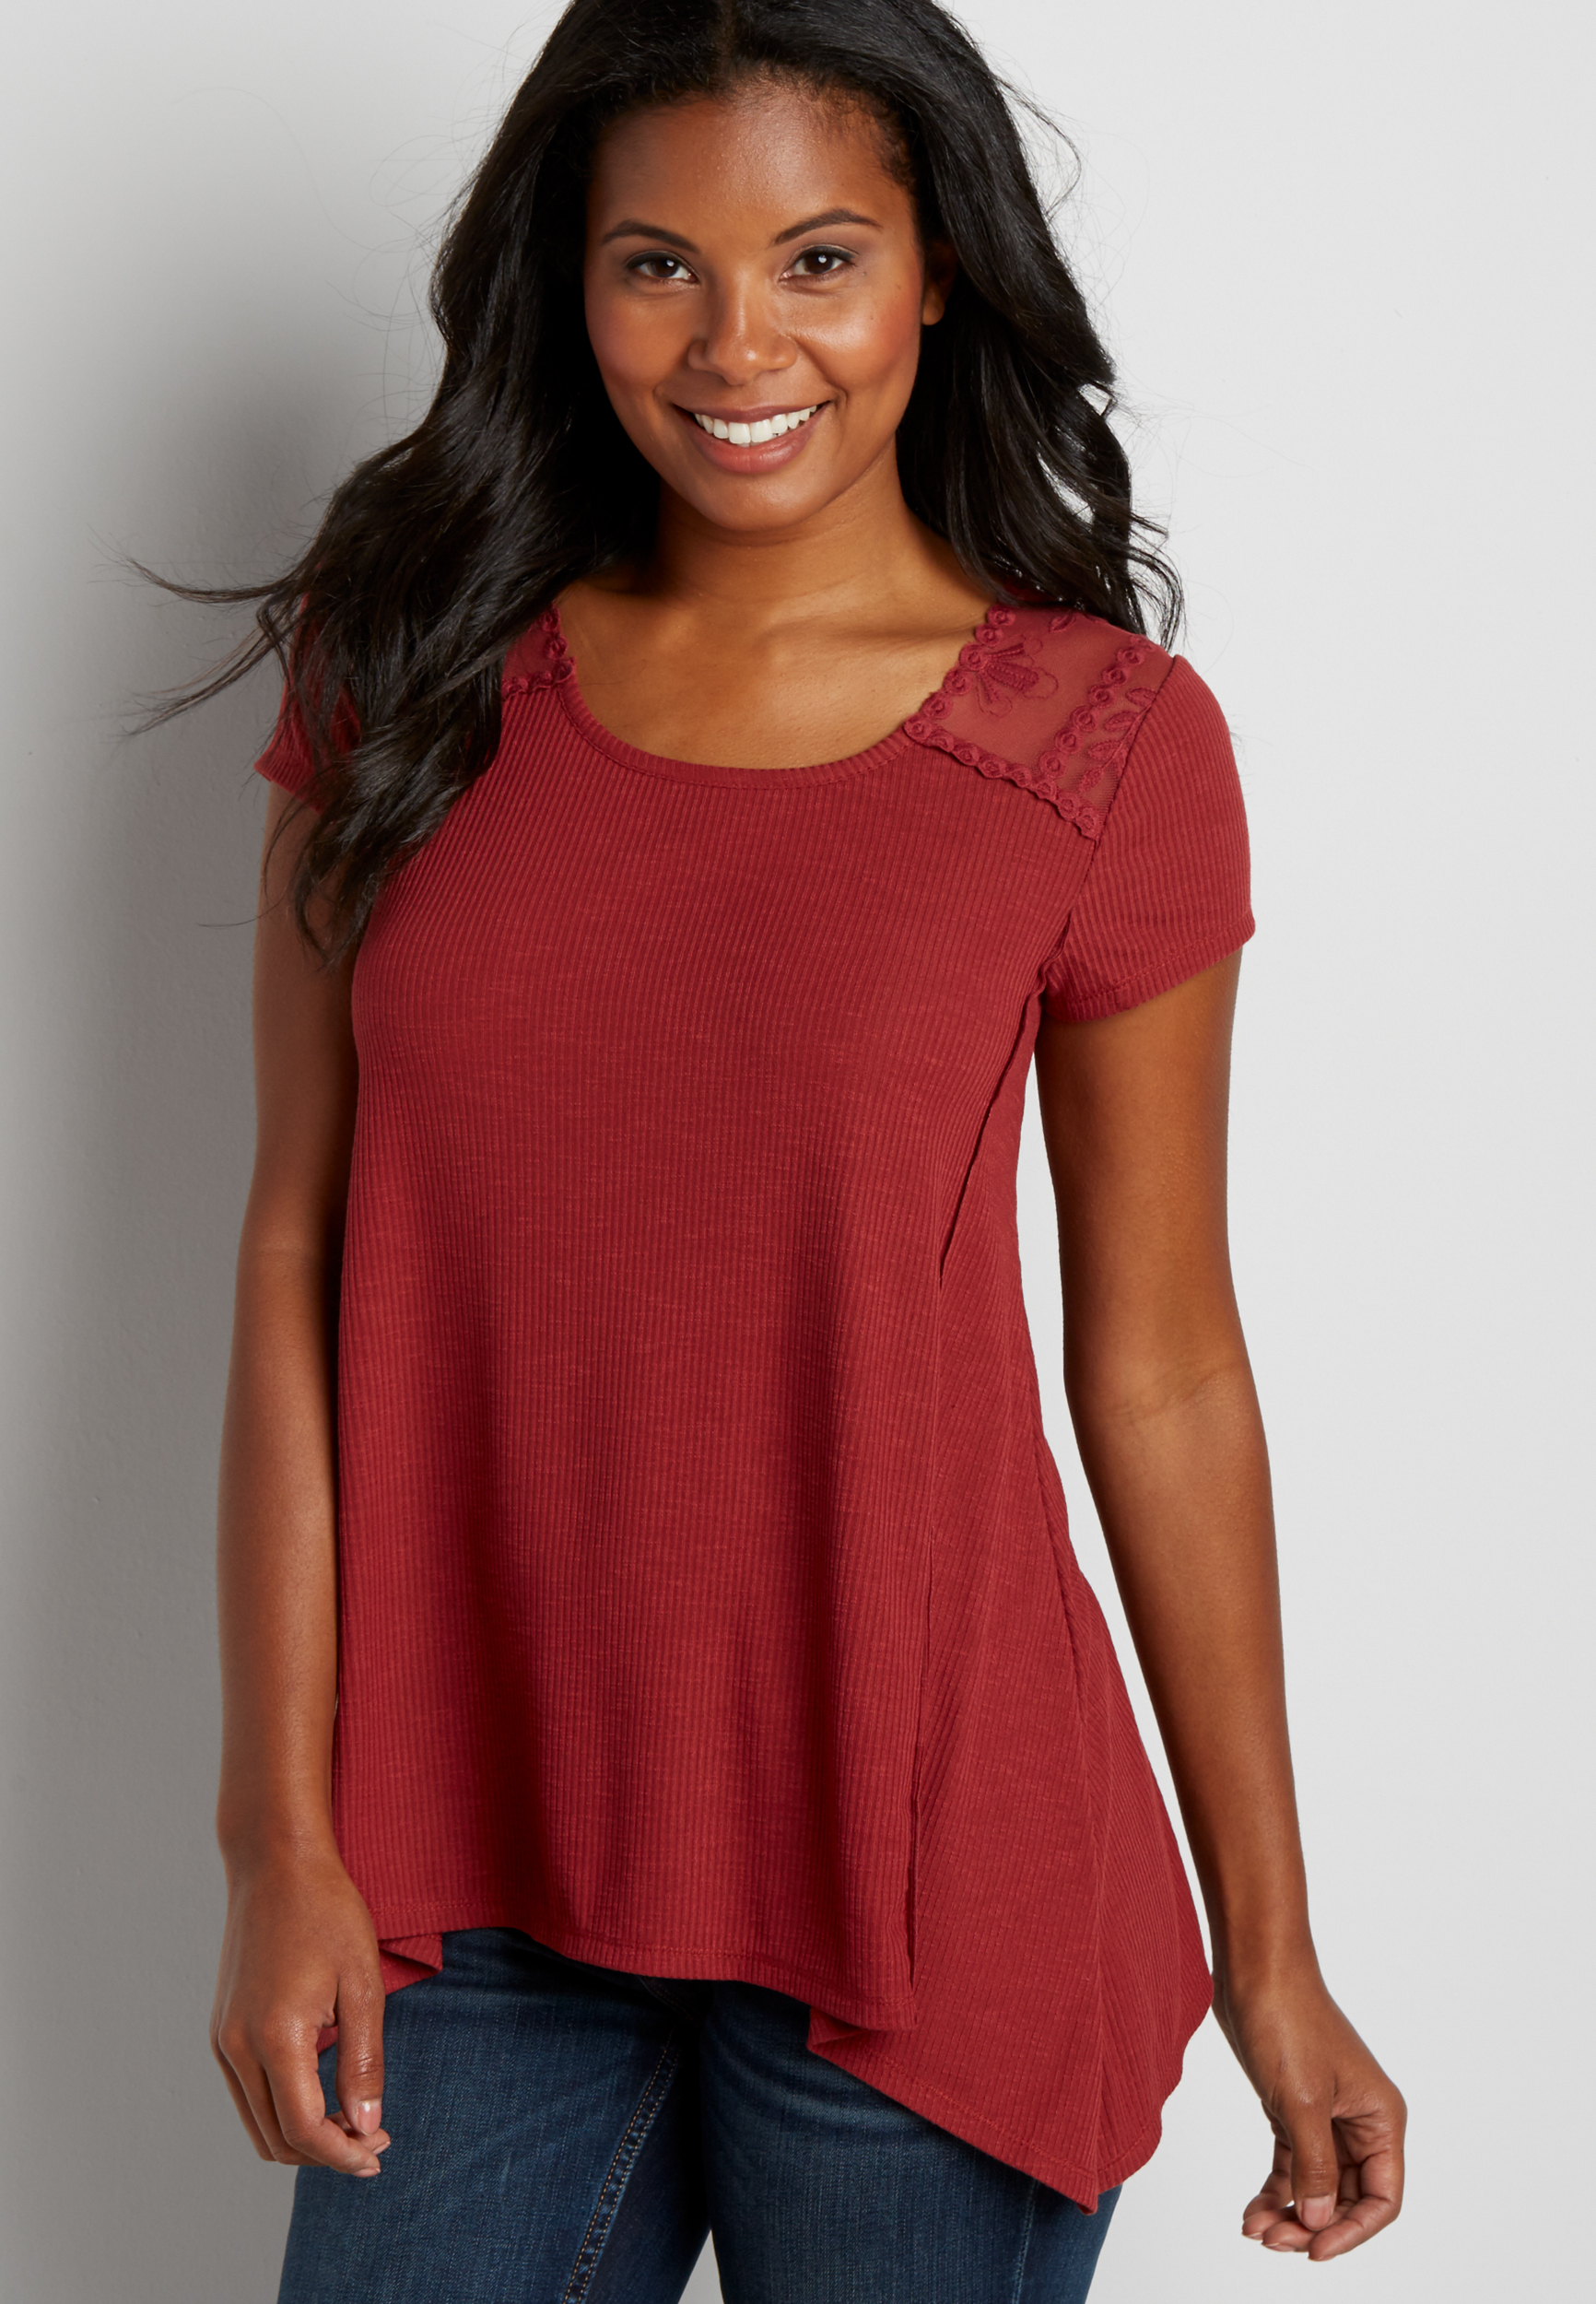 ribbed tee with shark bite hem and embroidered mesh yoke | maurices